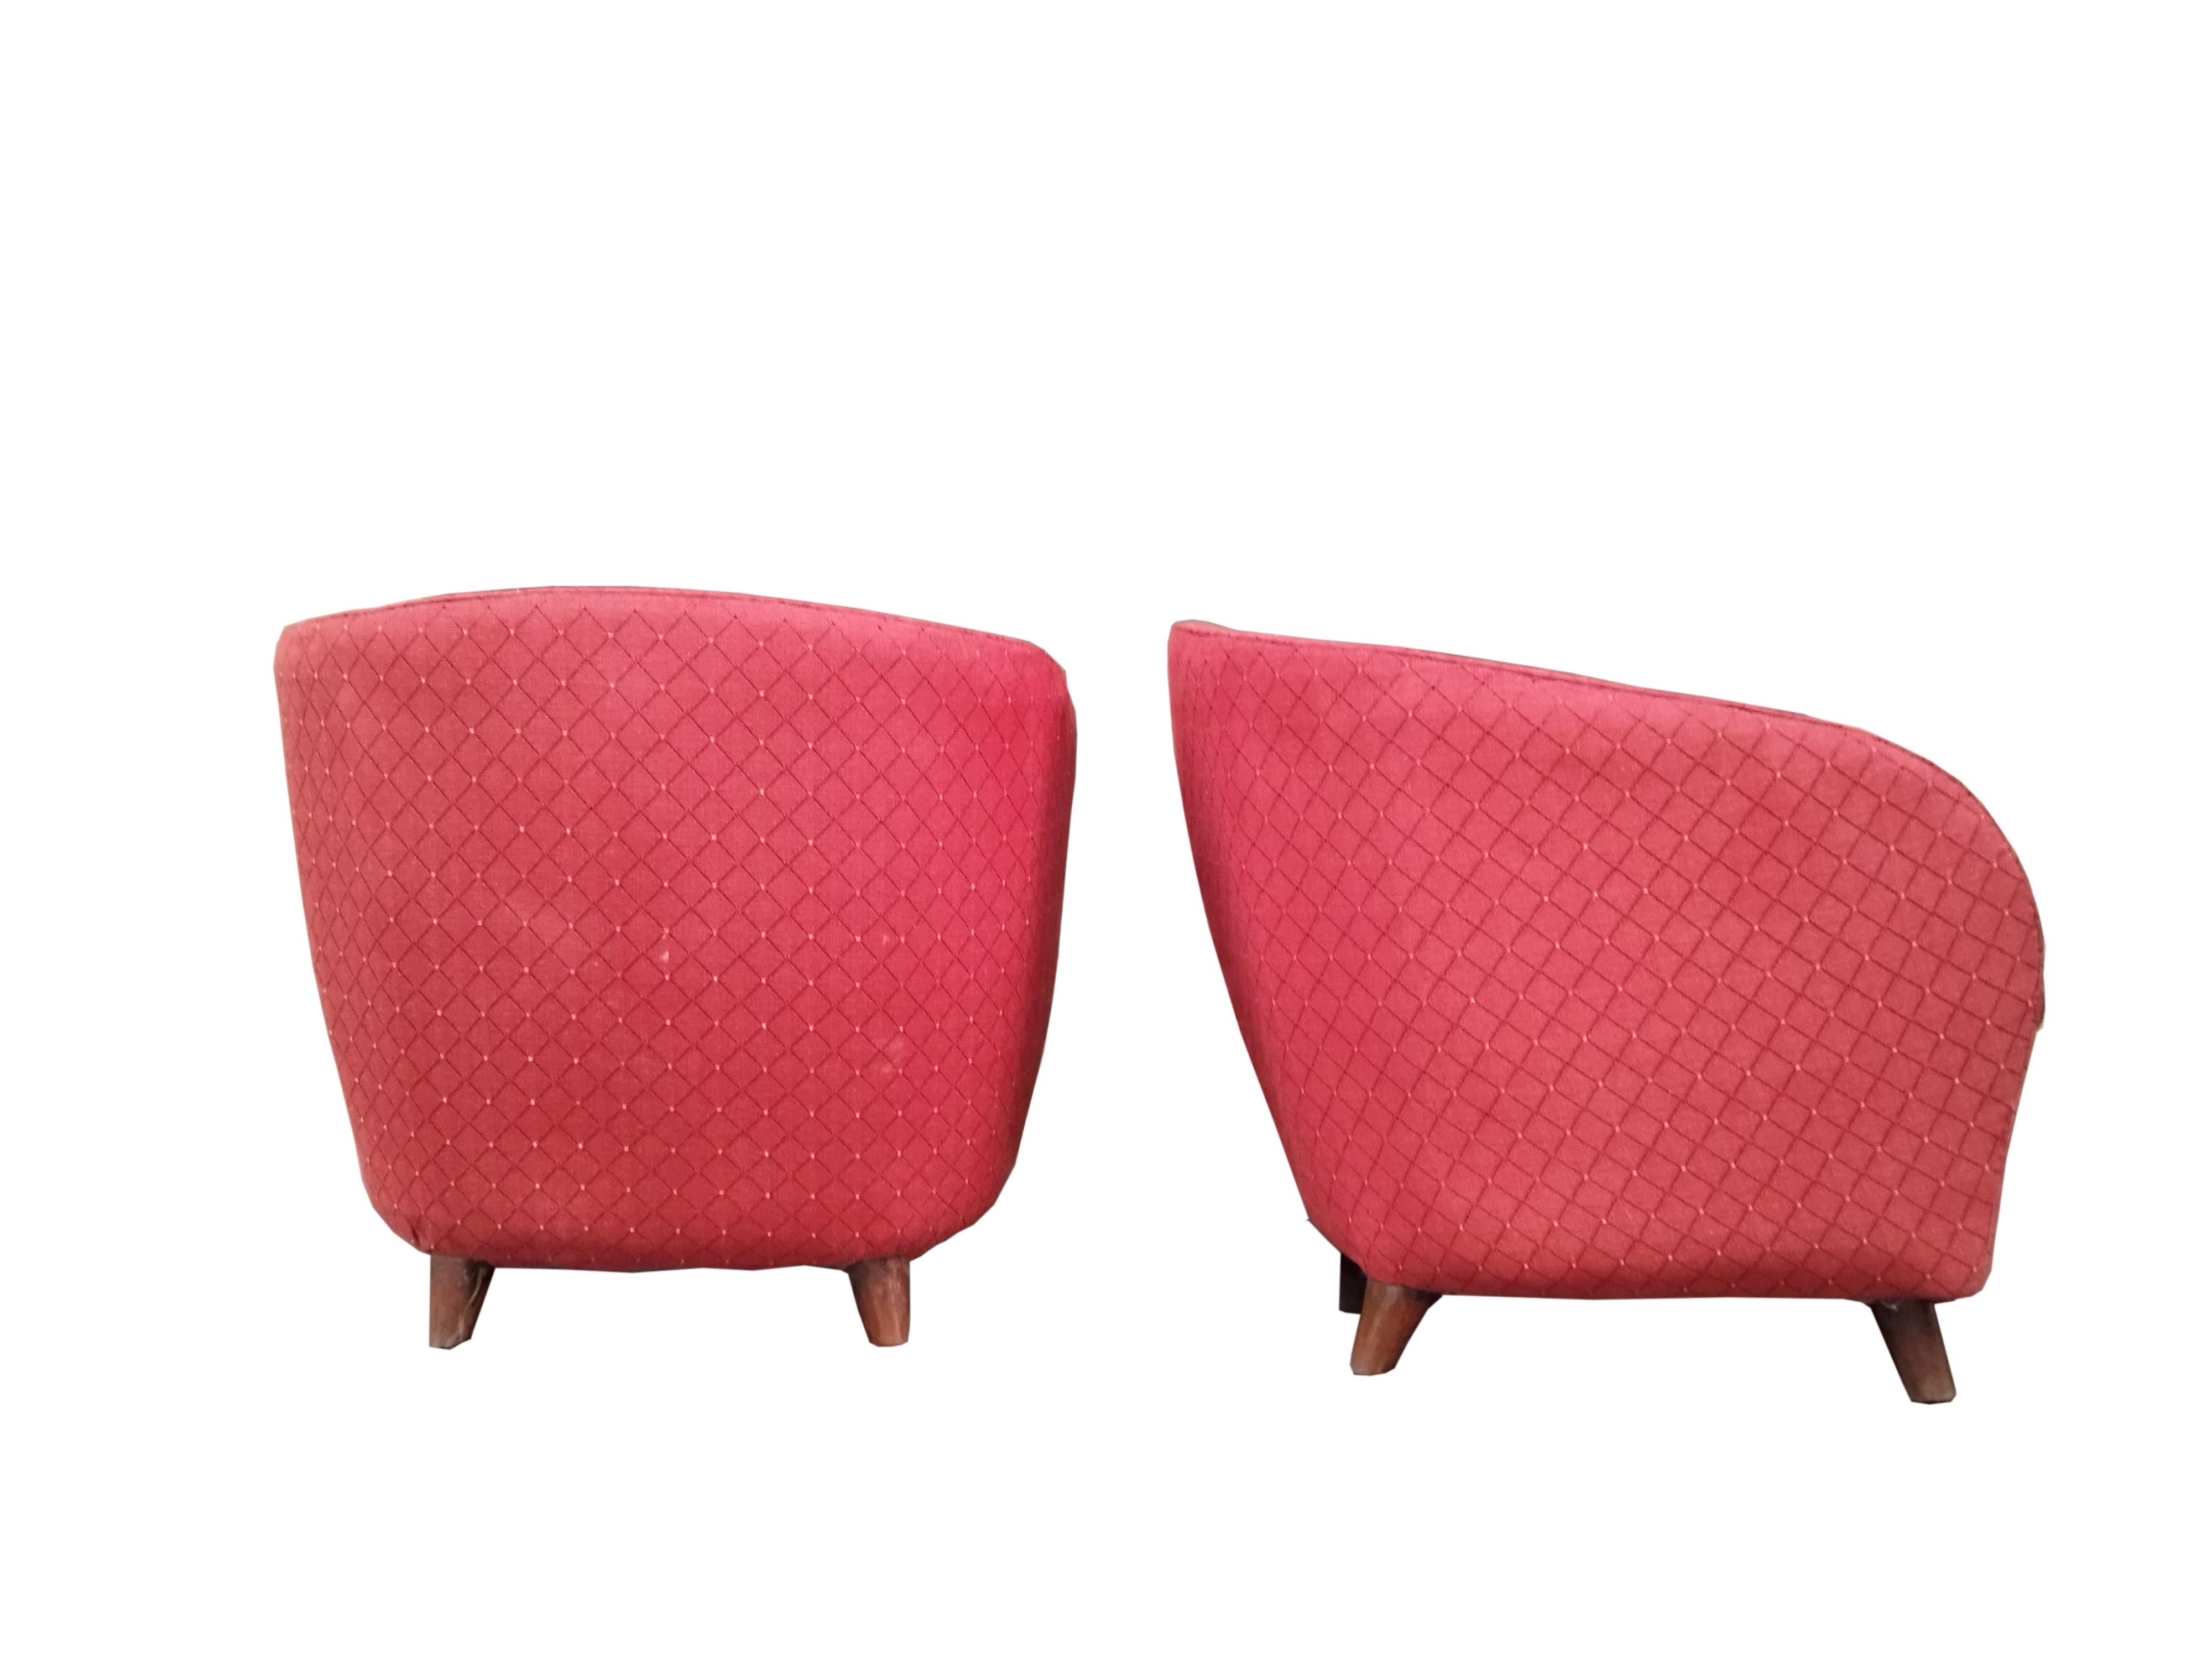 Gio Ponti Attrib. Pair of Red Fabric Armchairs, Italy 1950s For Sale 1